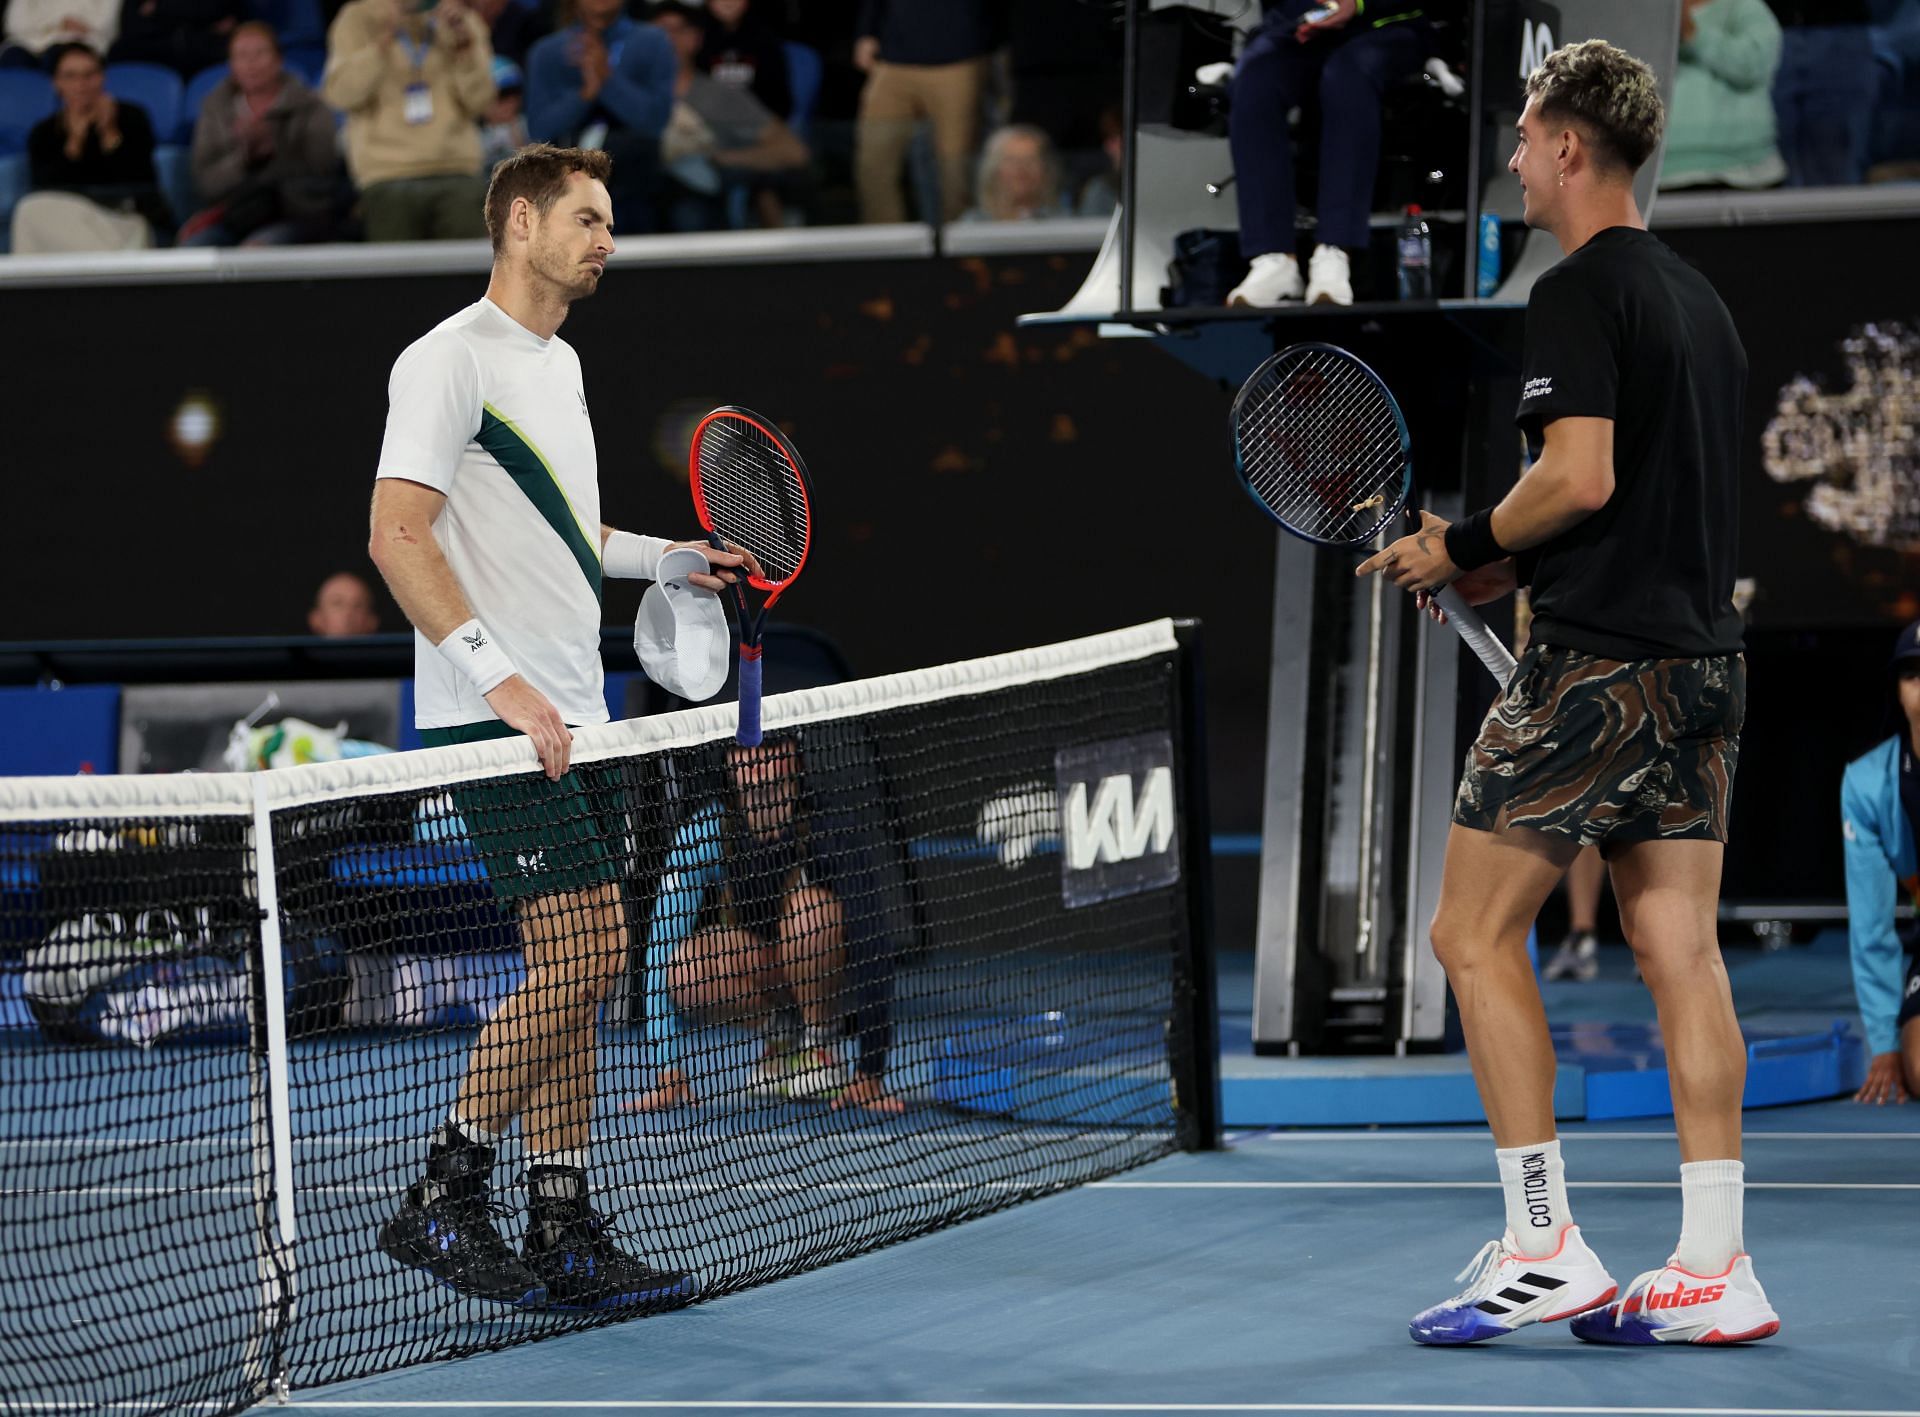 Murray (left) and Kokkinakis meet at the net after their epic battle.